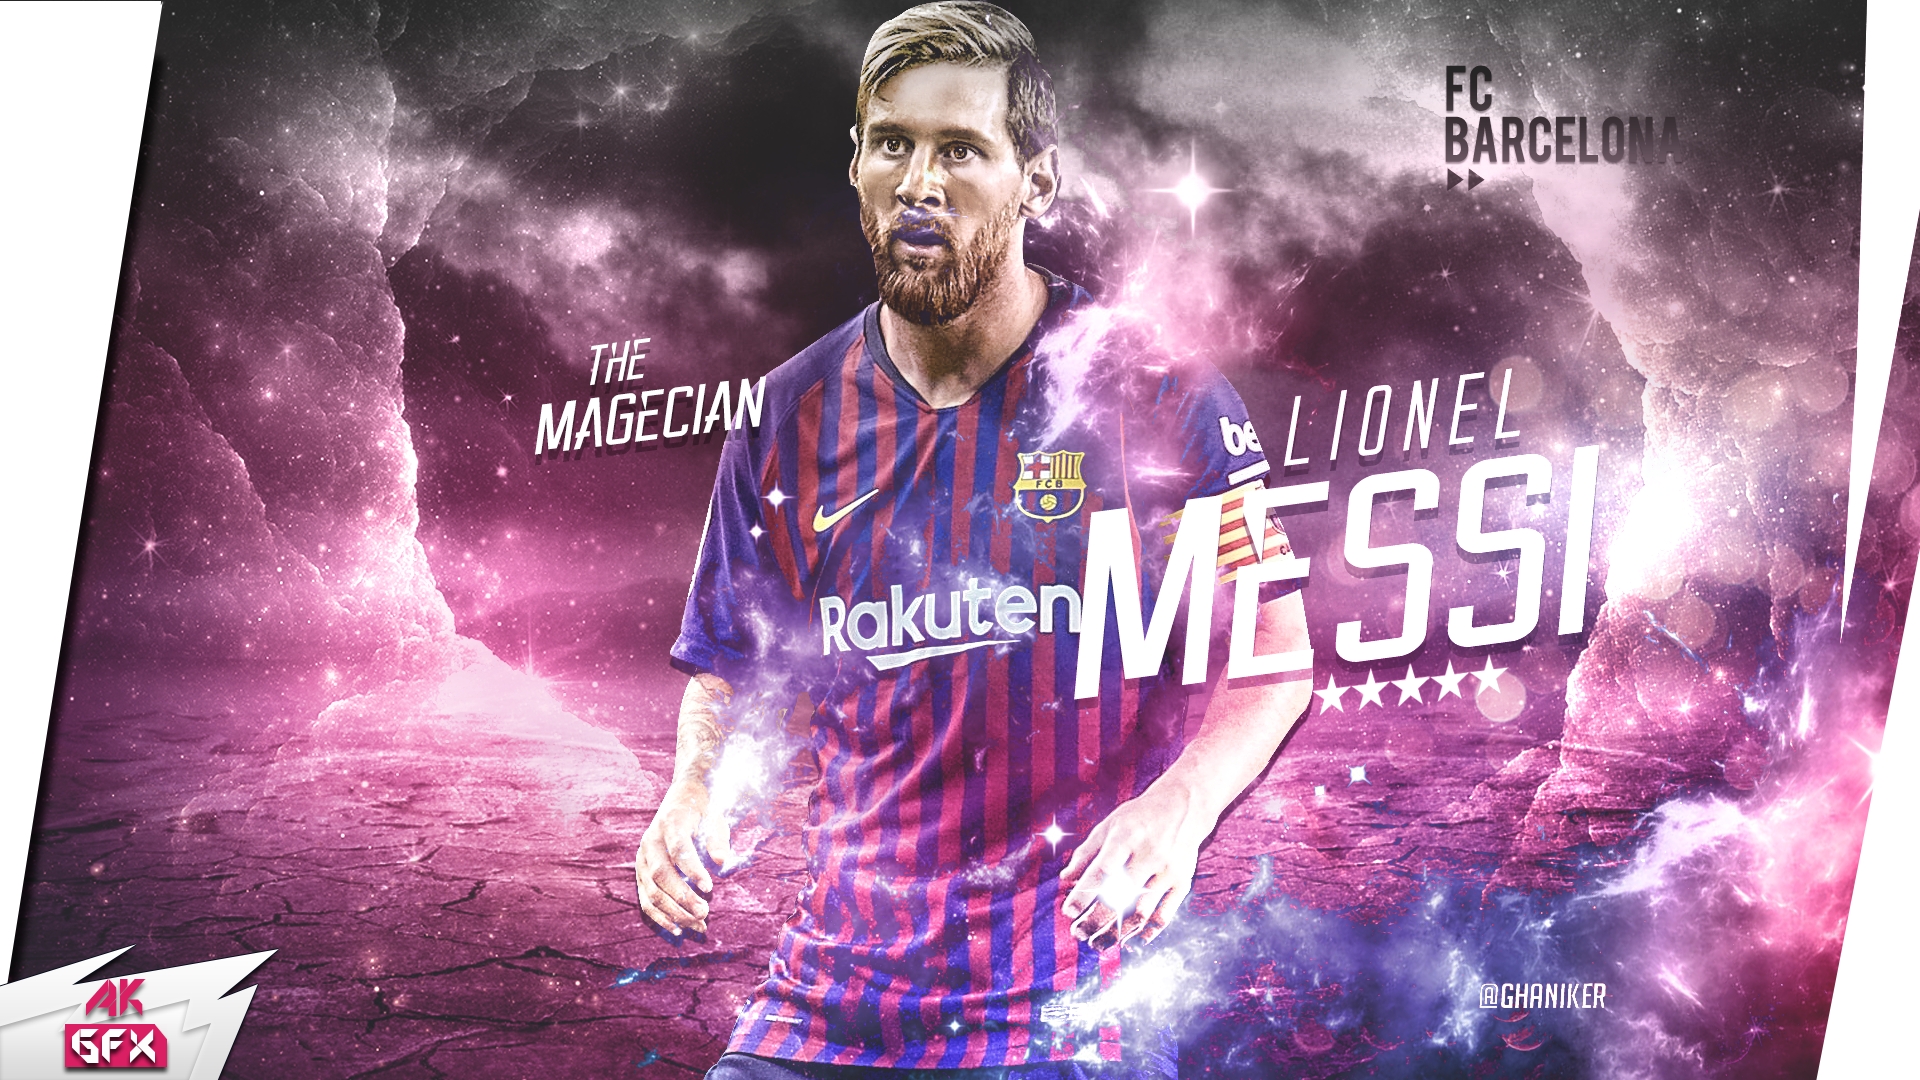 Lionel Messi Barca Hd Wallpaper Background Image 1920x1080 Id 961996 Wallpaper Abyss